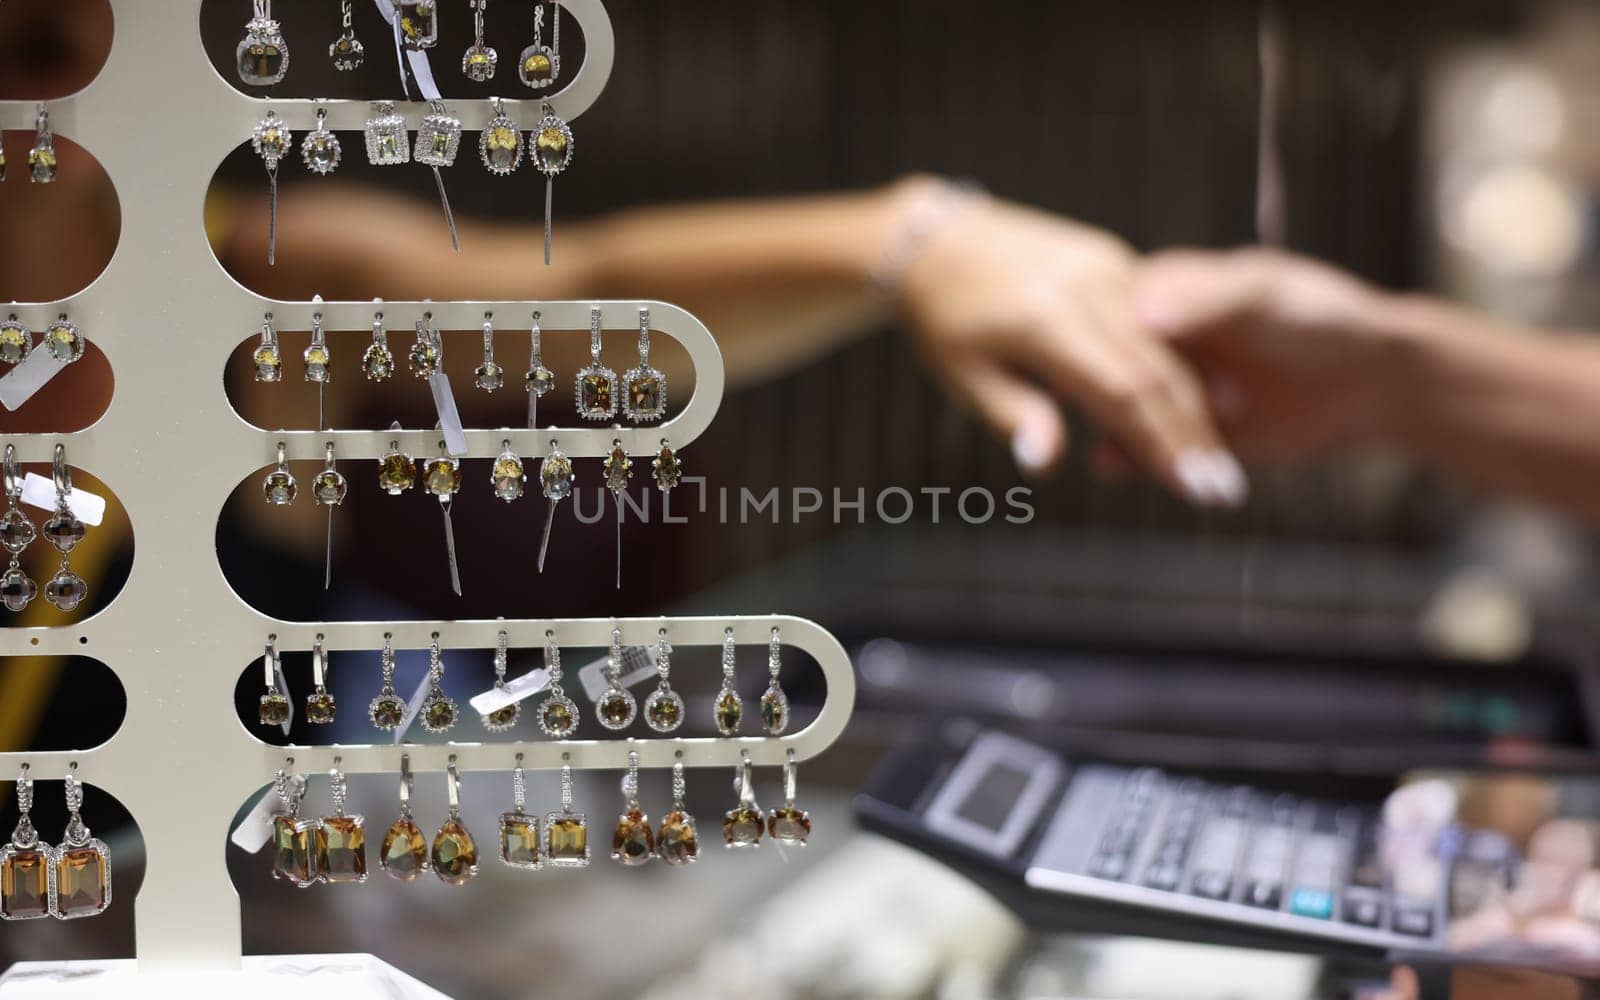 Lot of precious earrings with stones sold in jewelry store closeup by kuprevich